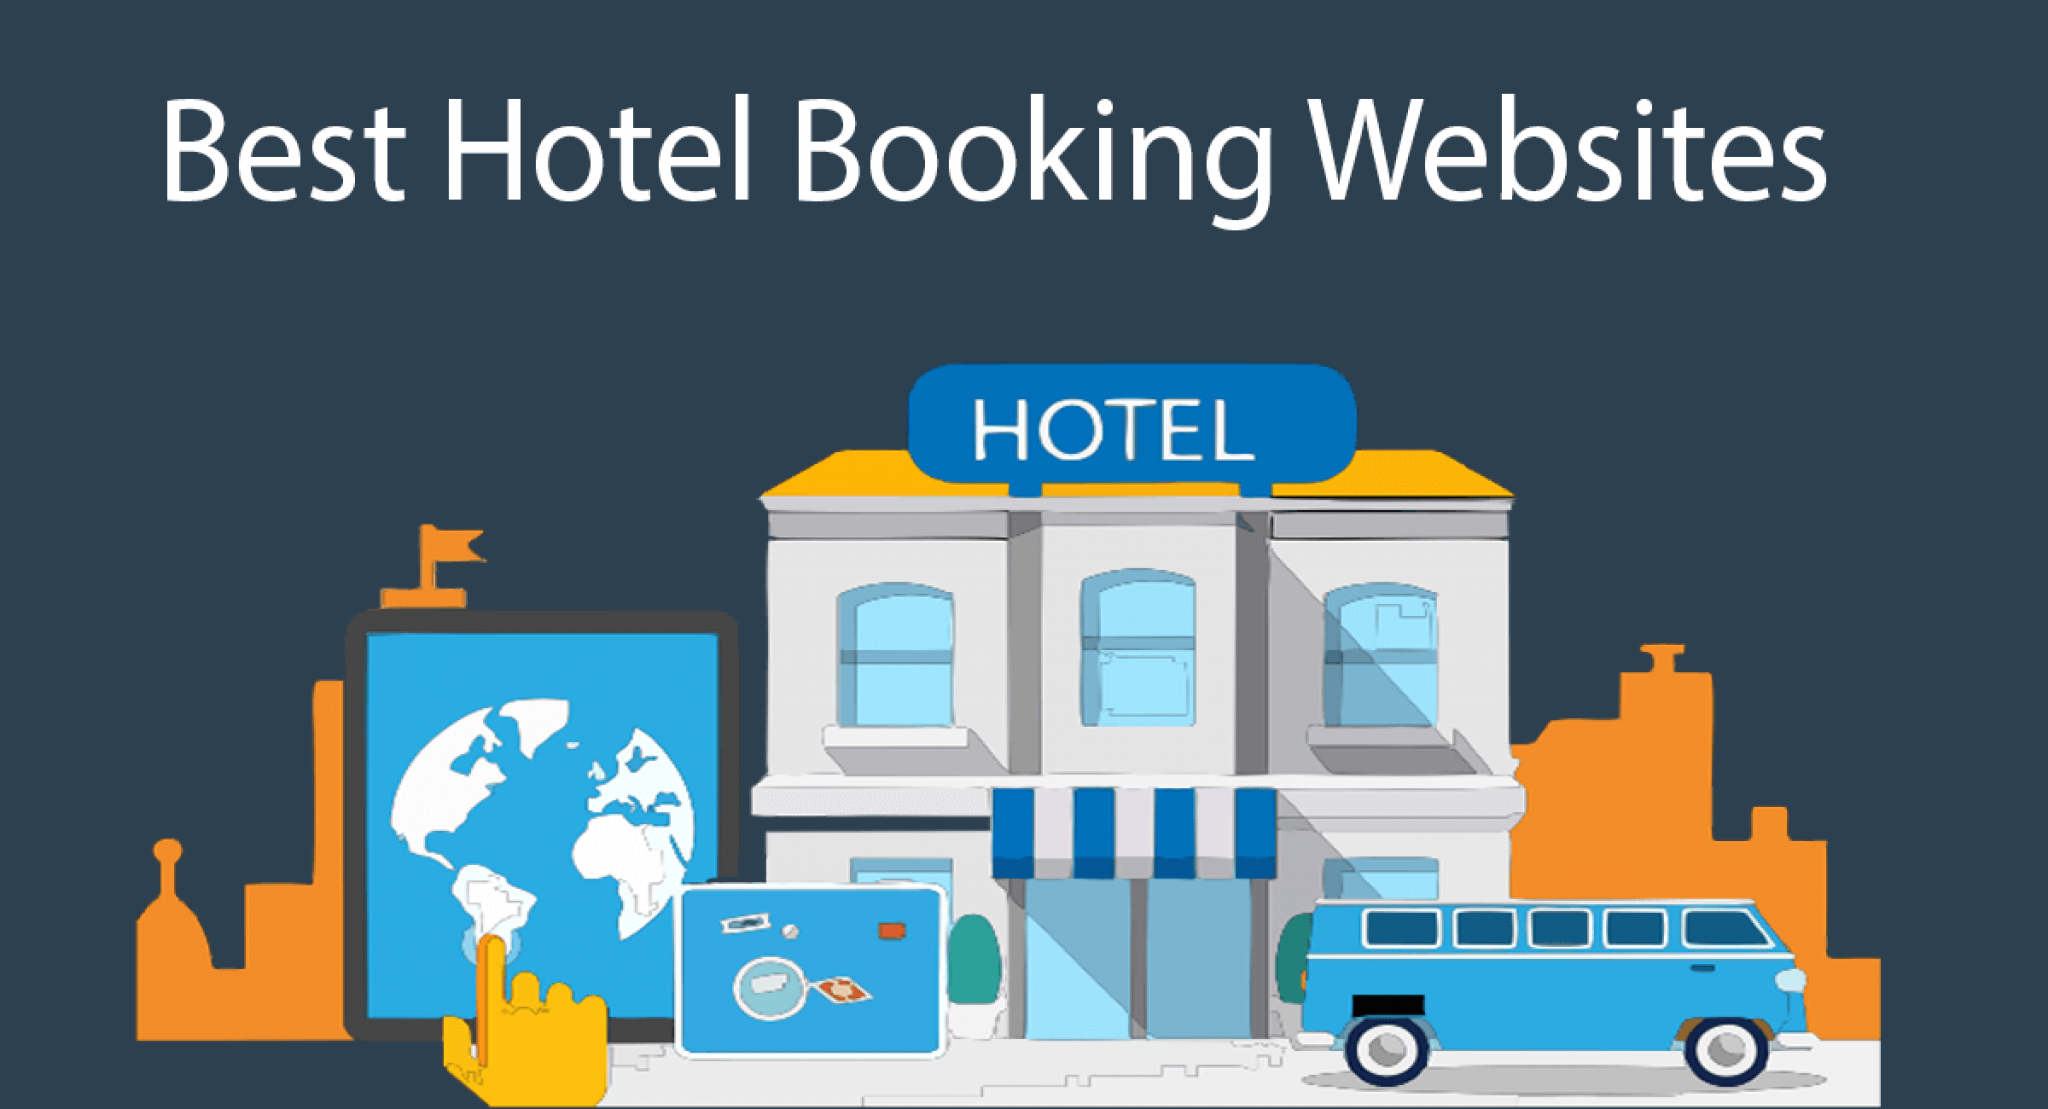 previous booked hotels